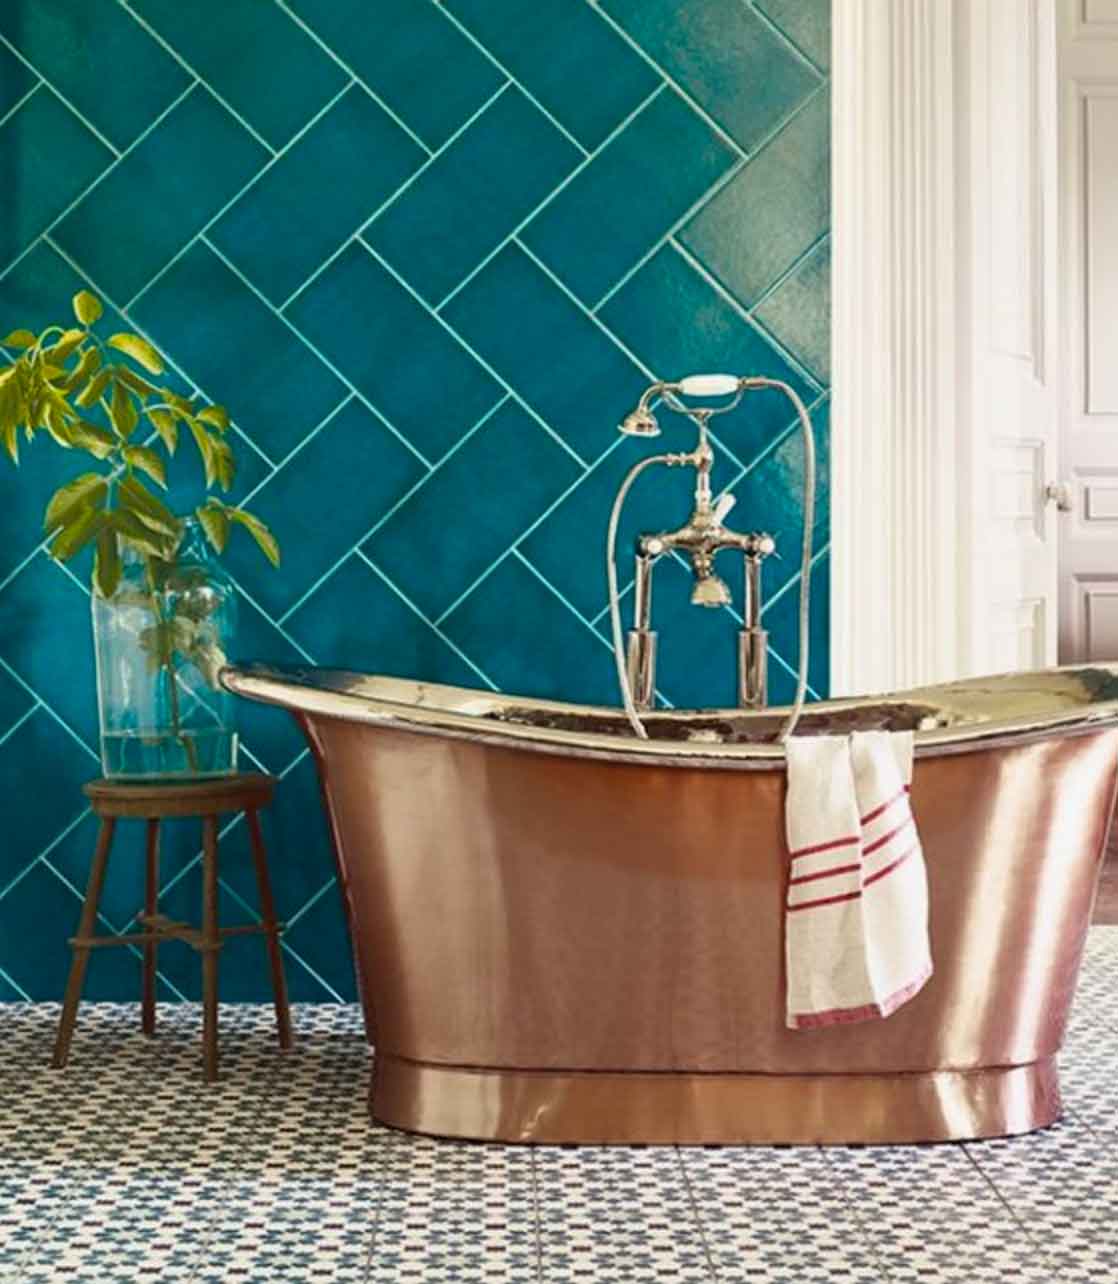 Image Of A Luxurious Copper Bath From Fired Earth In - Sherwin Williams Oceanside Sw6496 - HD Wallpaper 